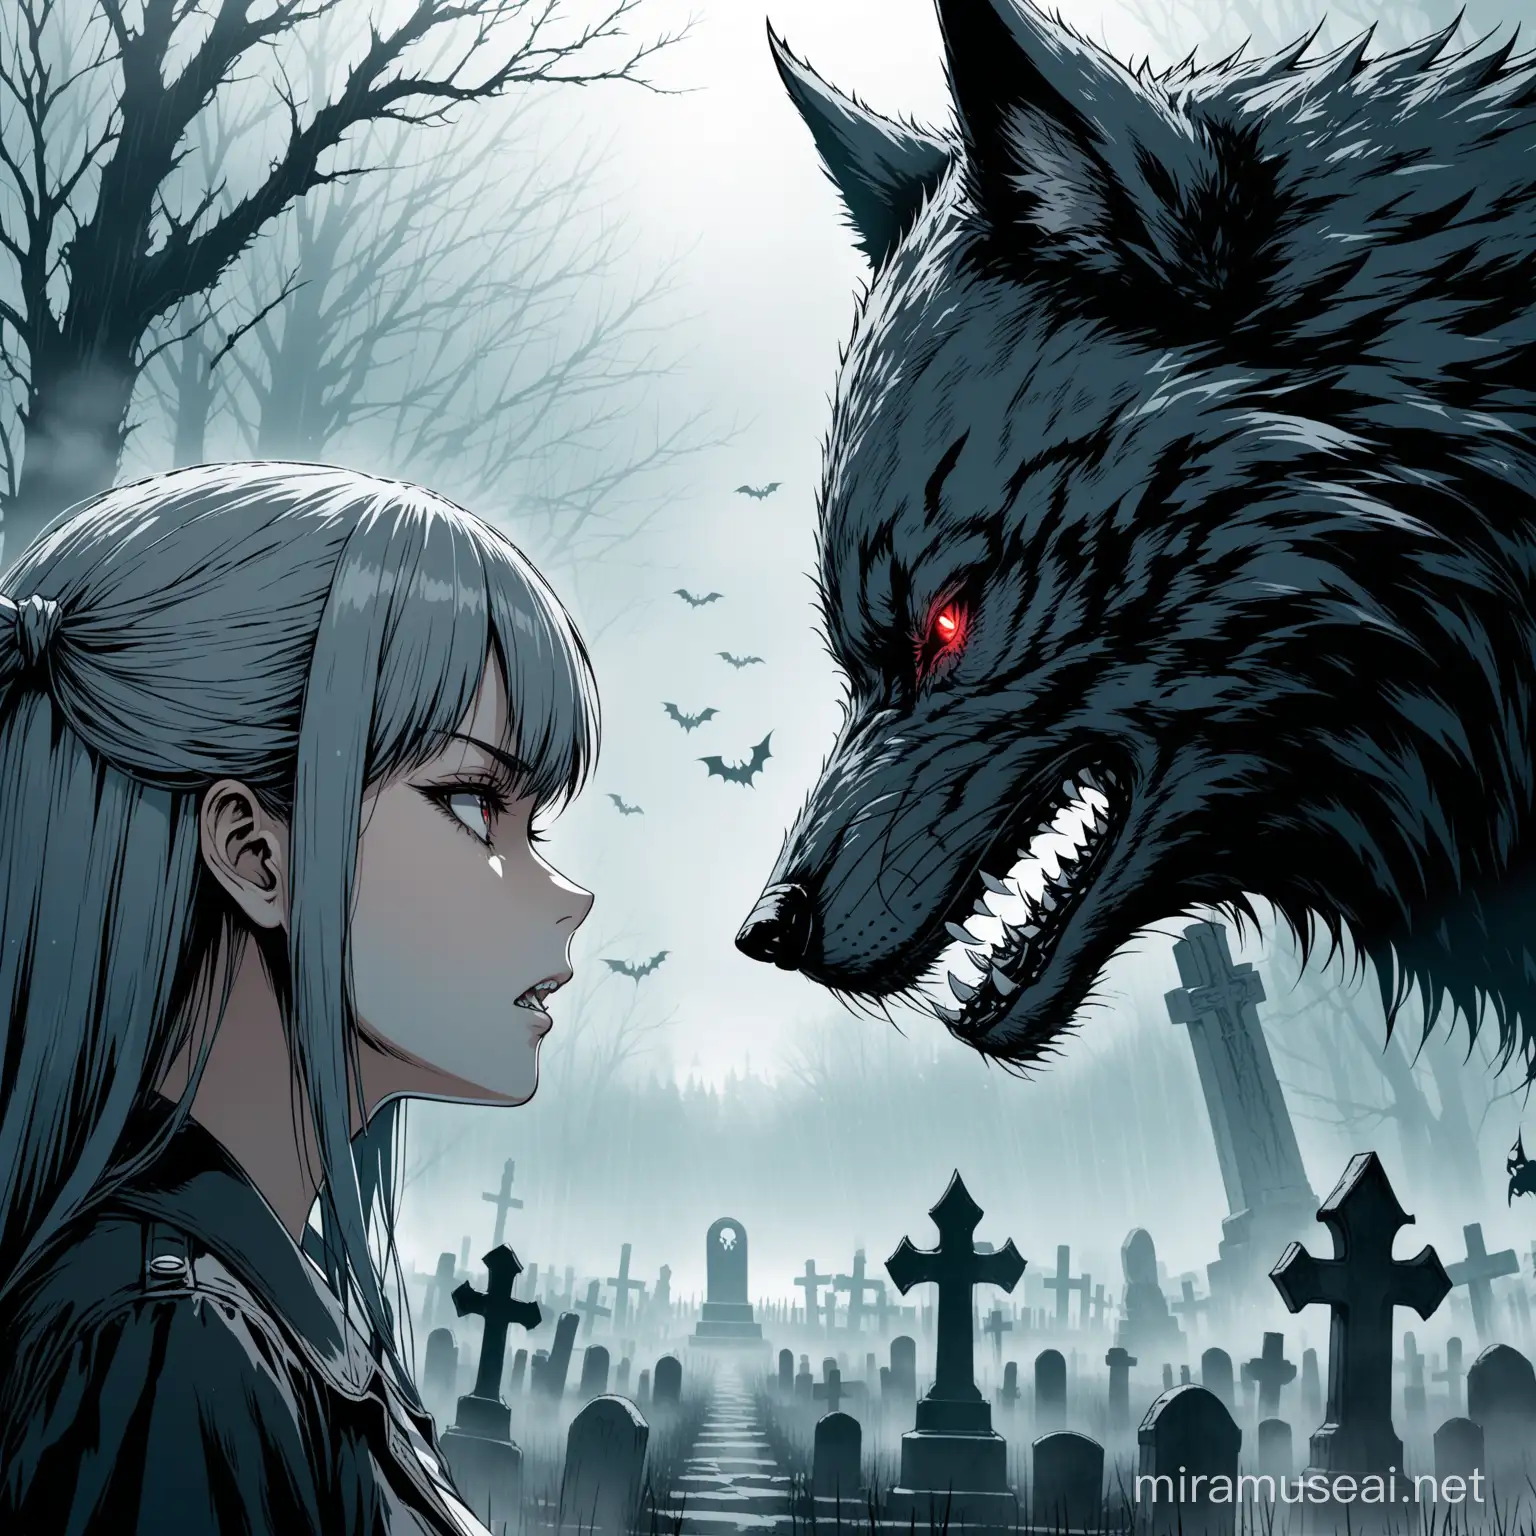 Intense Encounter Beautiful Girl Confronts Furious Demon Wolf in Misty Graveyard